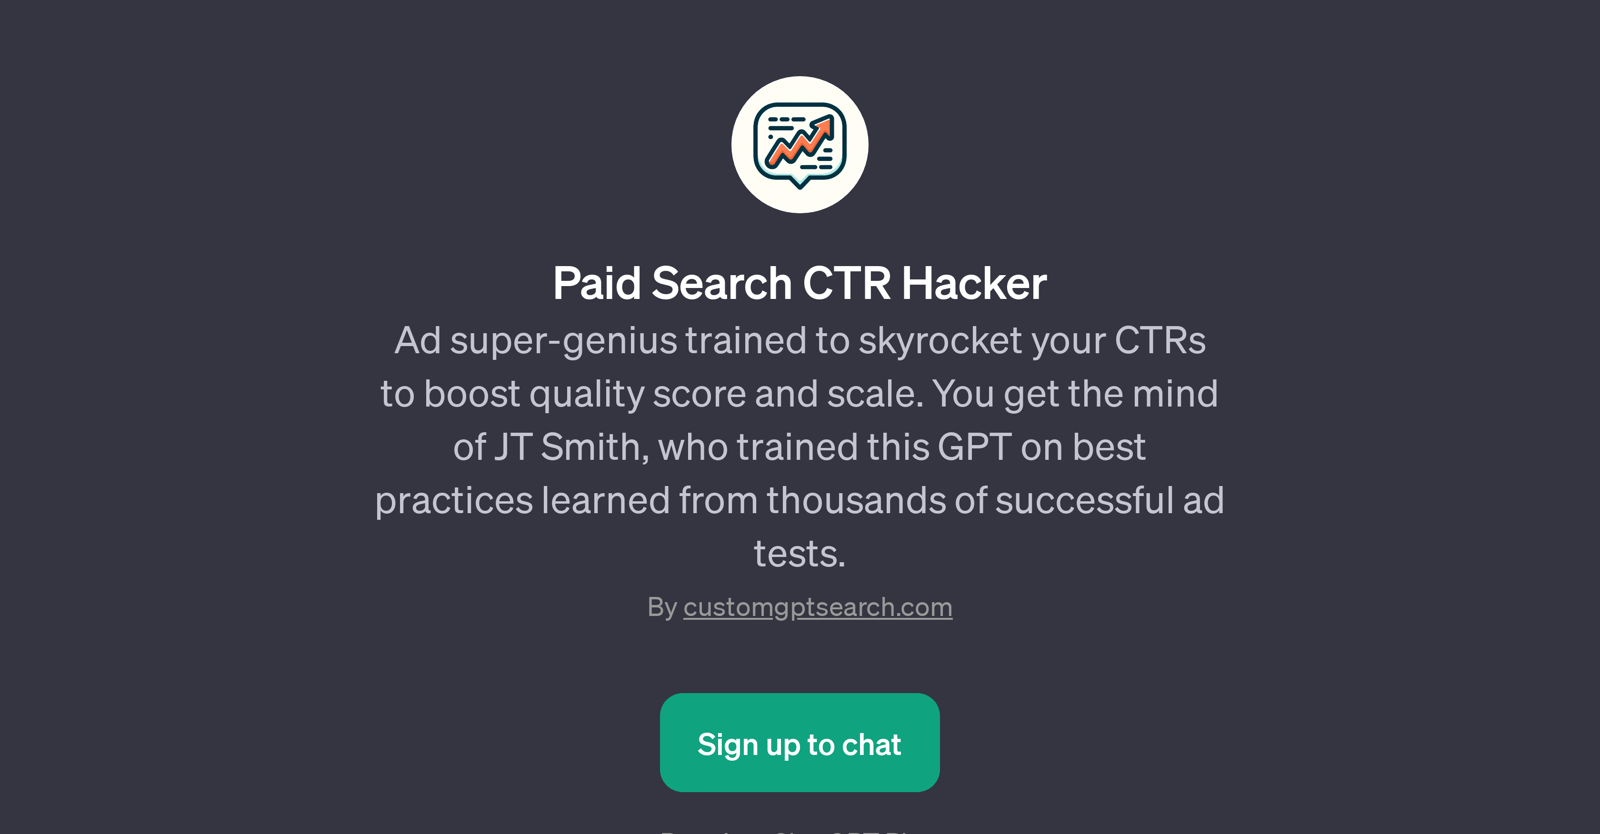 Paid Search CTR Hacker website